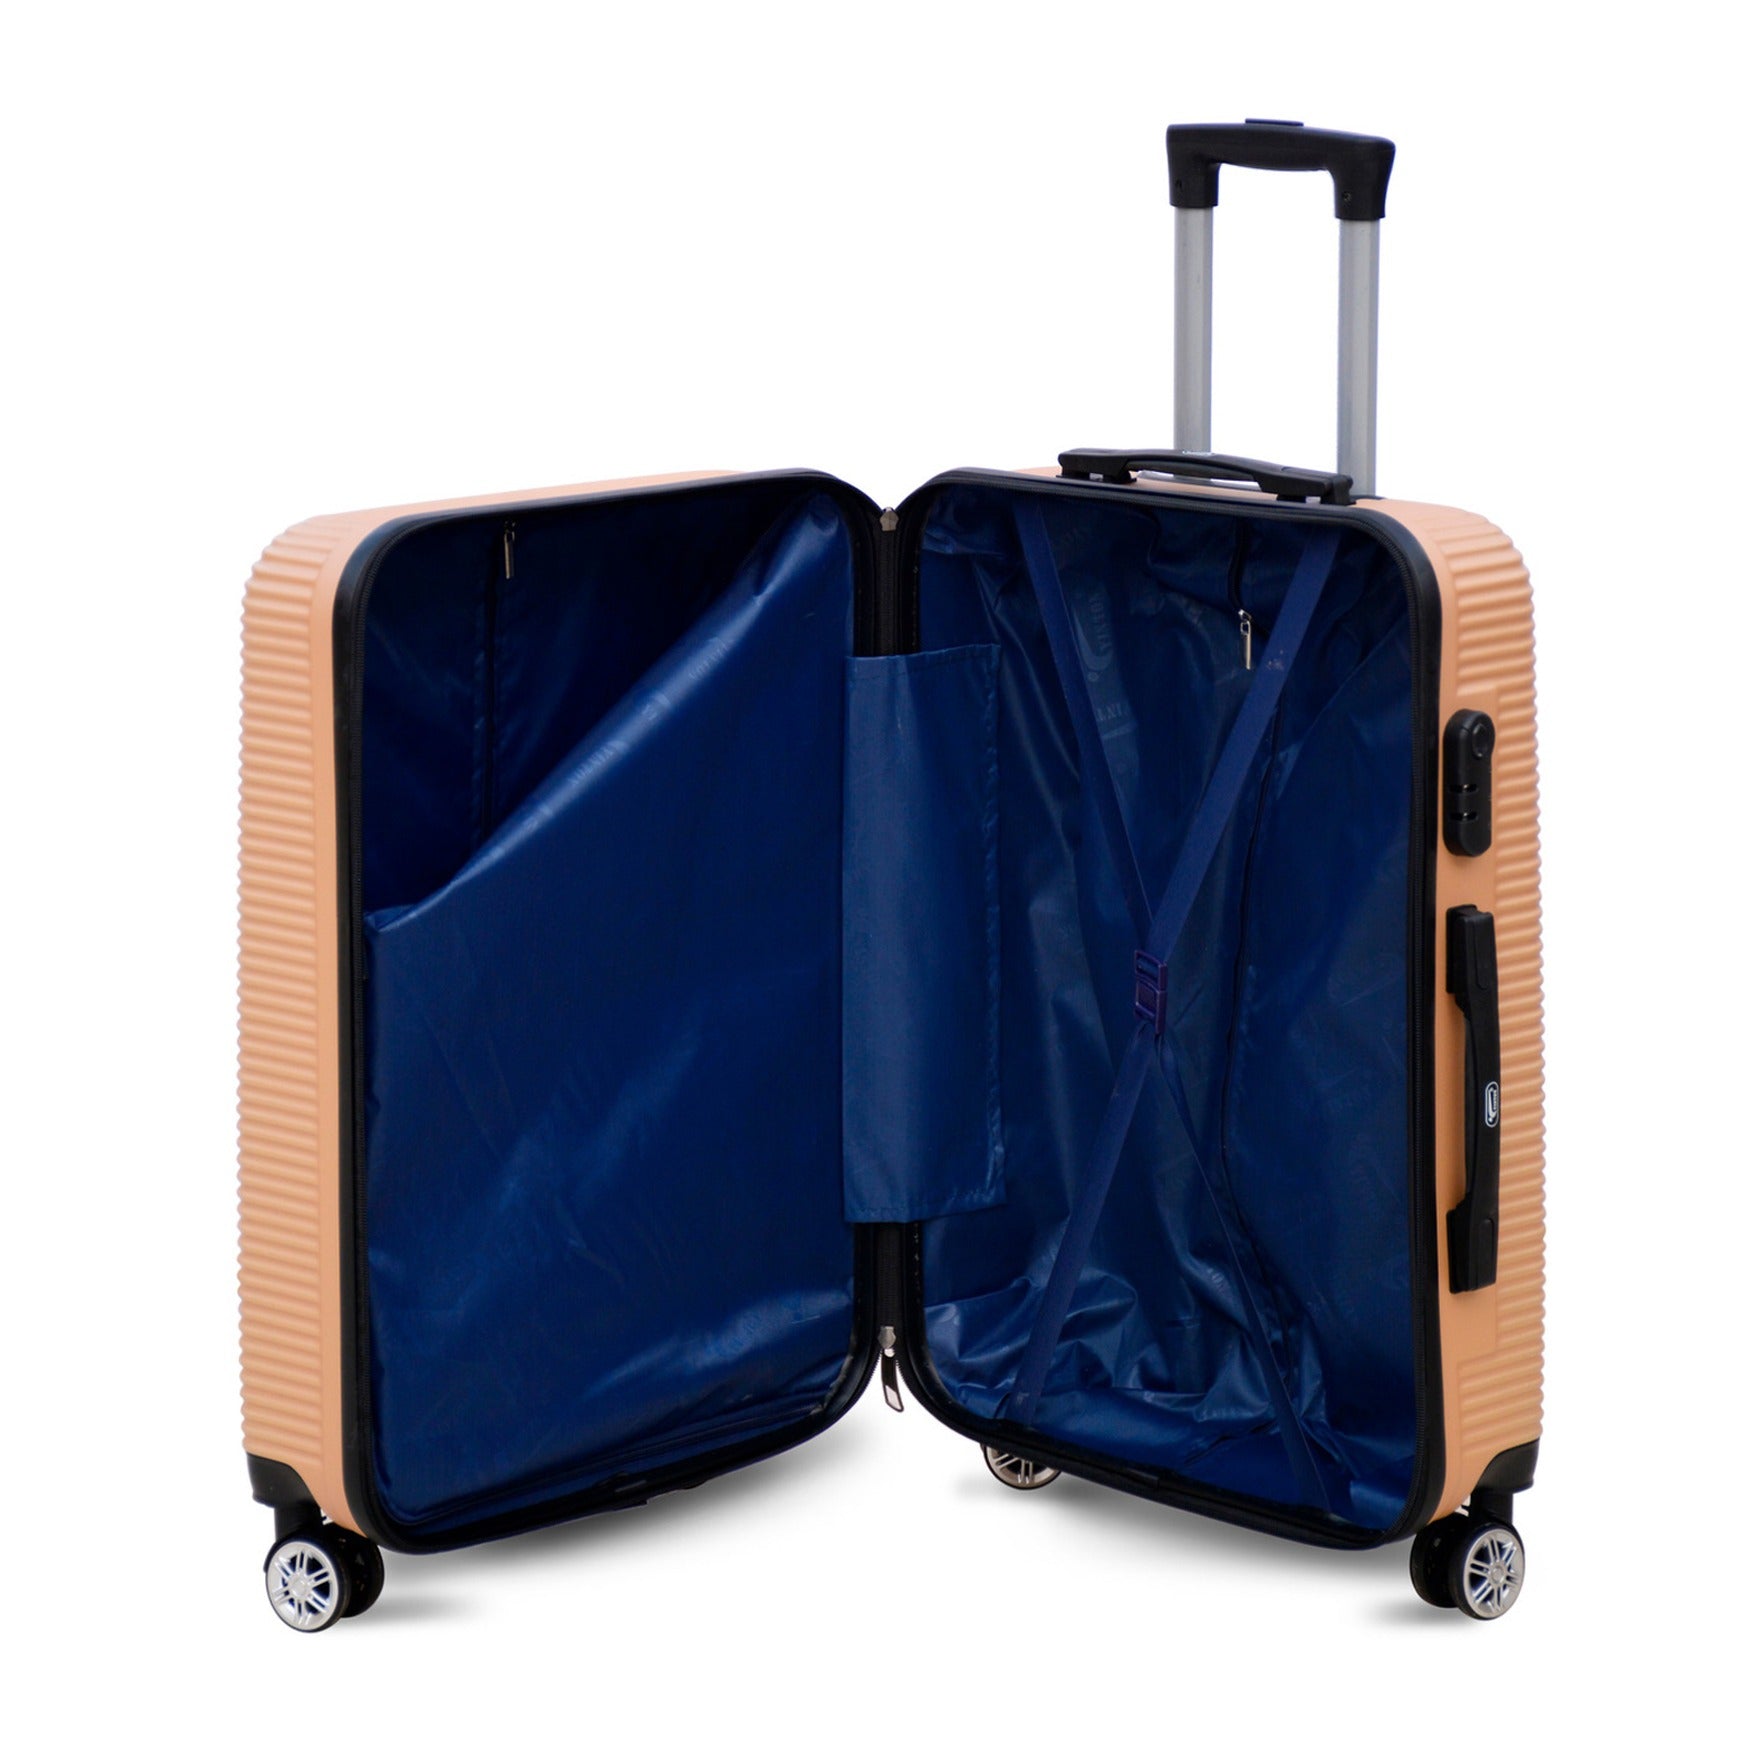 28" Gold Colour JIAN ABS Line Luggage Lightweight Hard Case Trolley Bag With Spinner Wheel